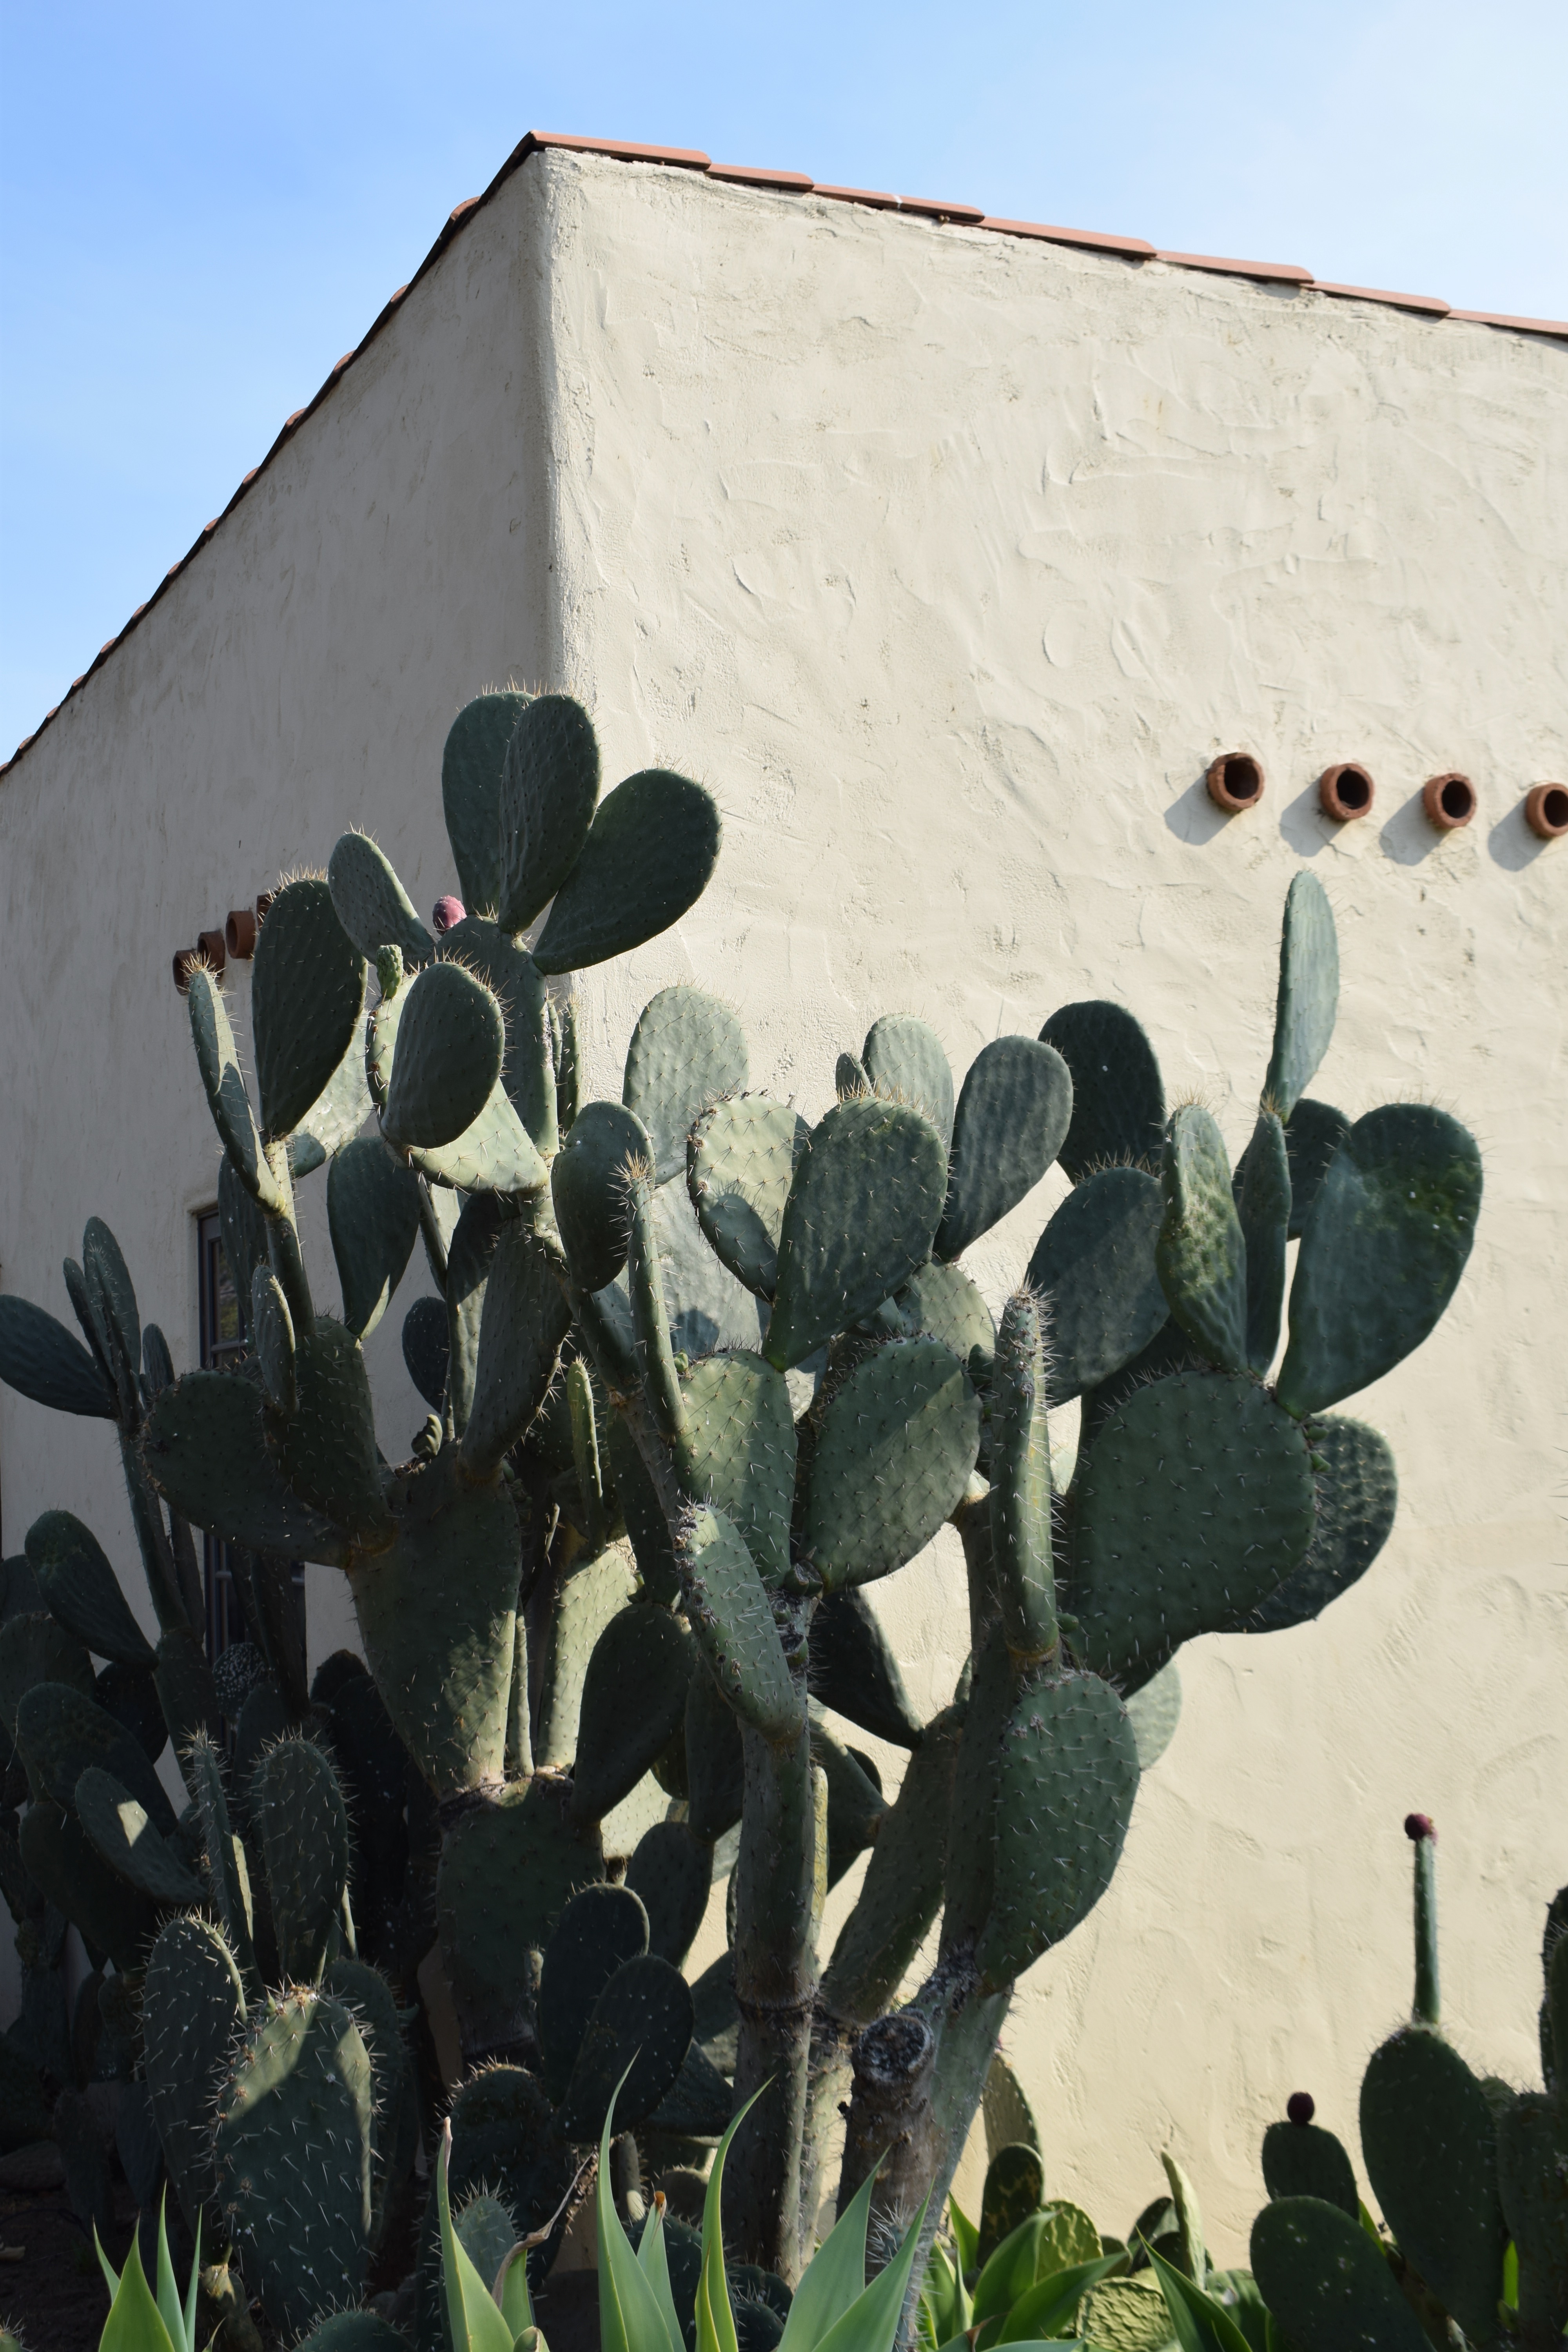 It's the weekend!, number 93. Cactus and white stucco building